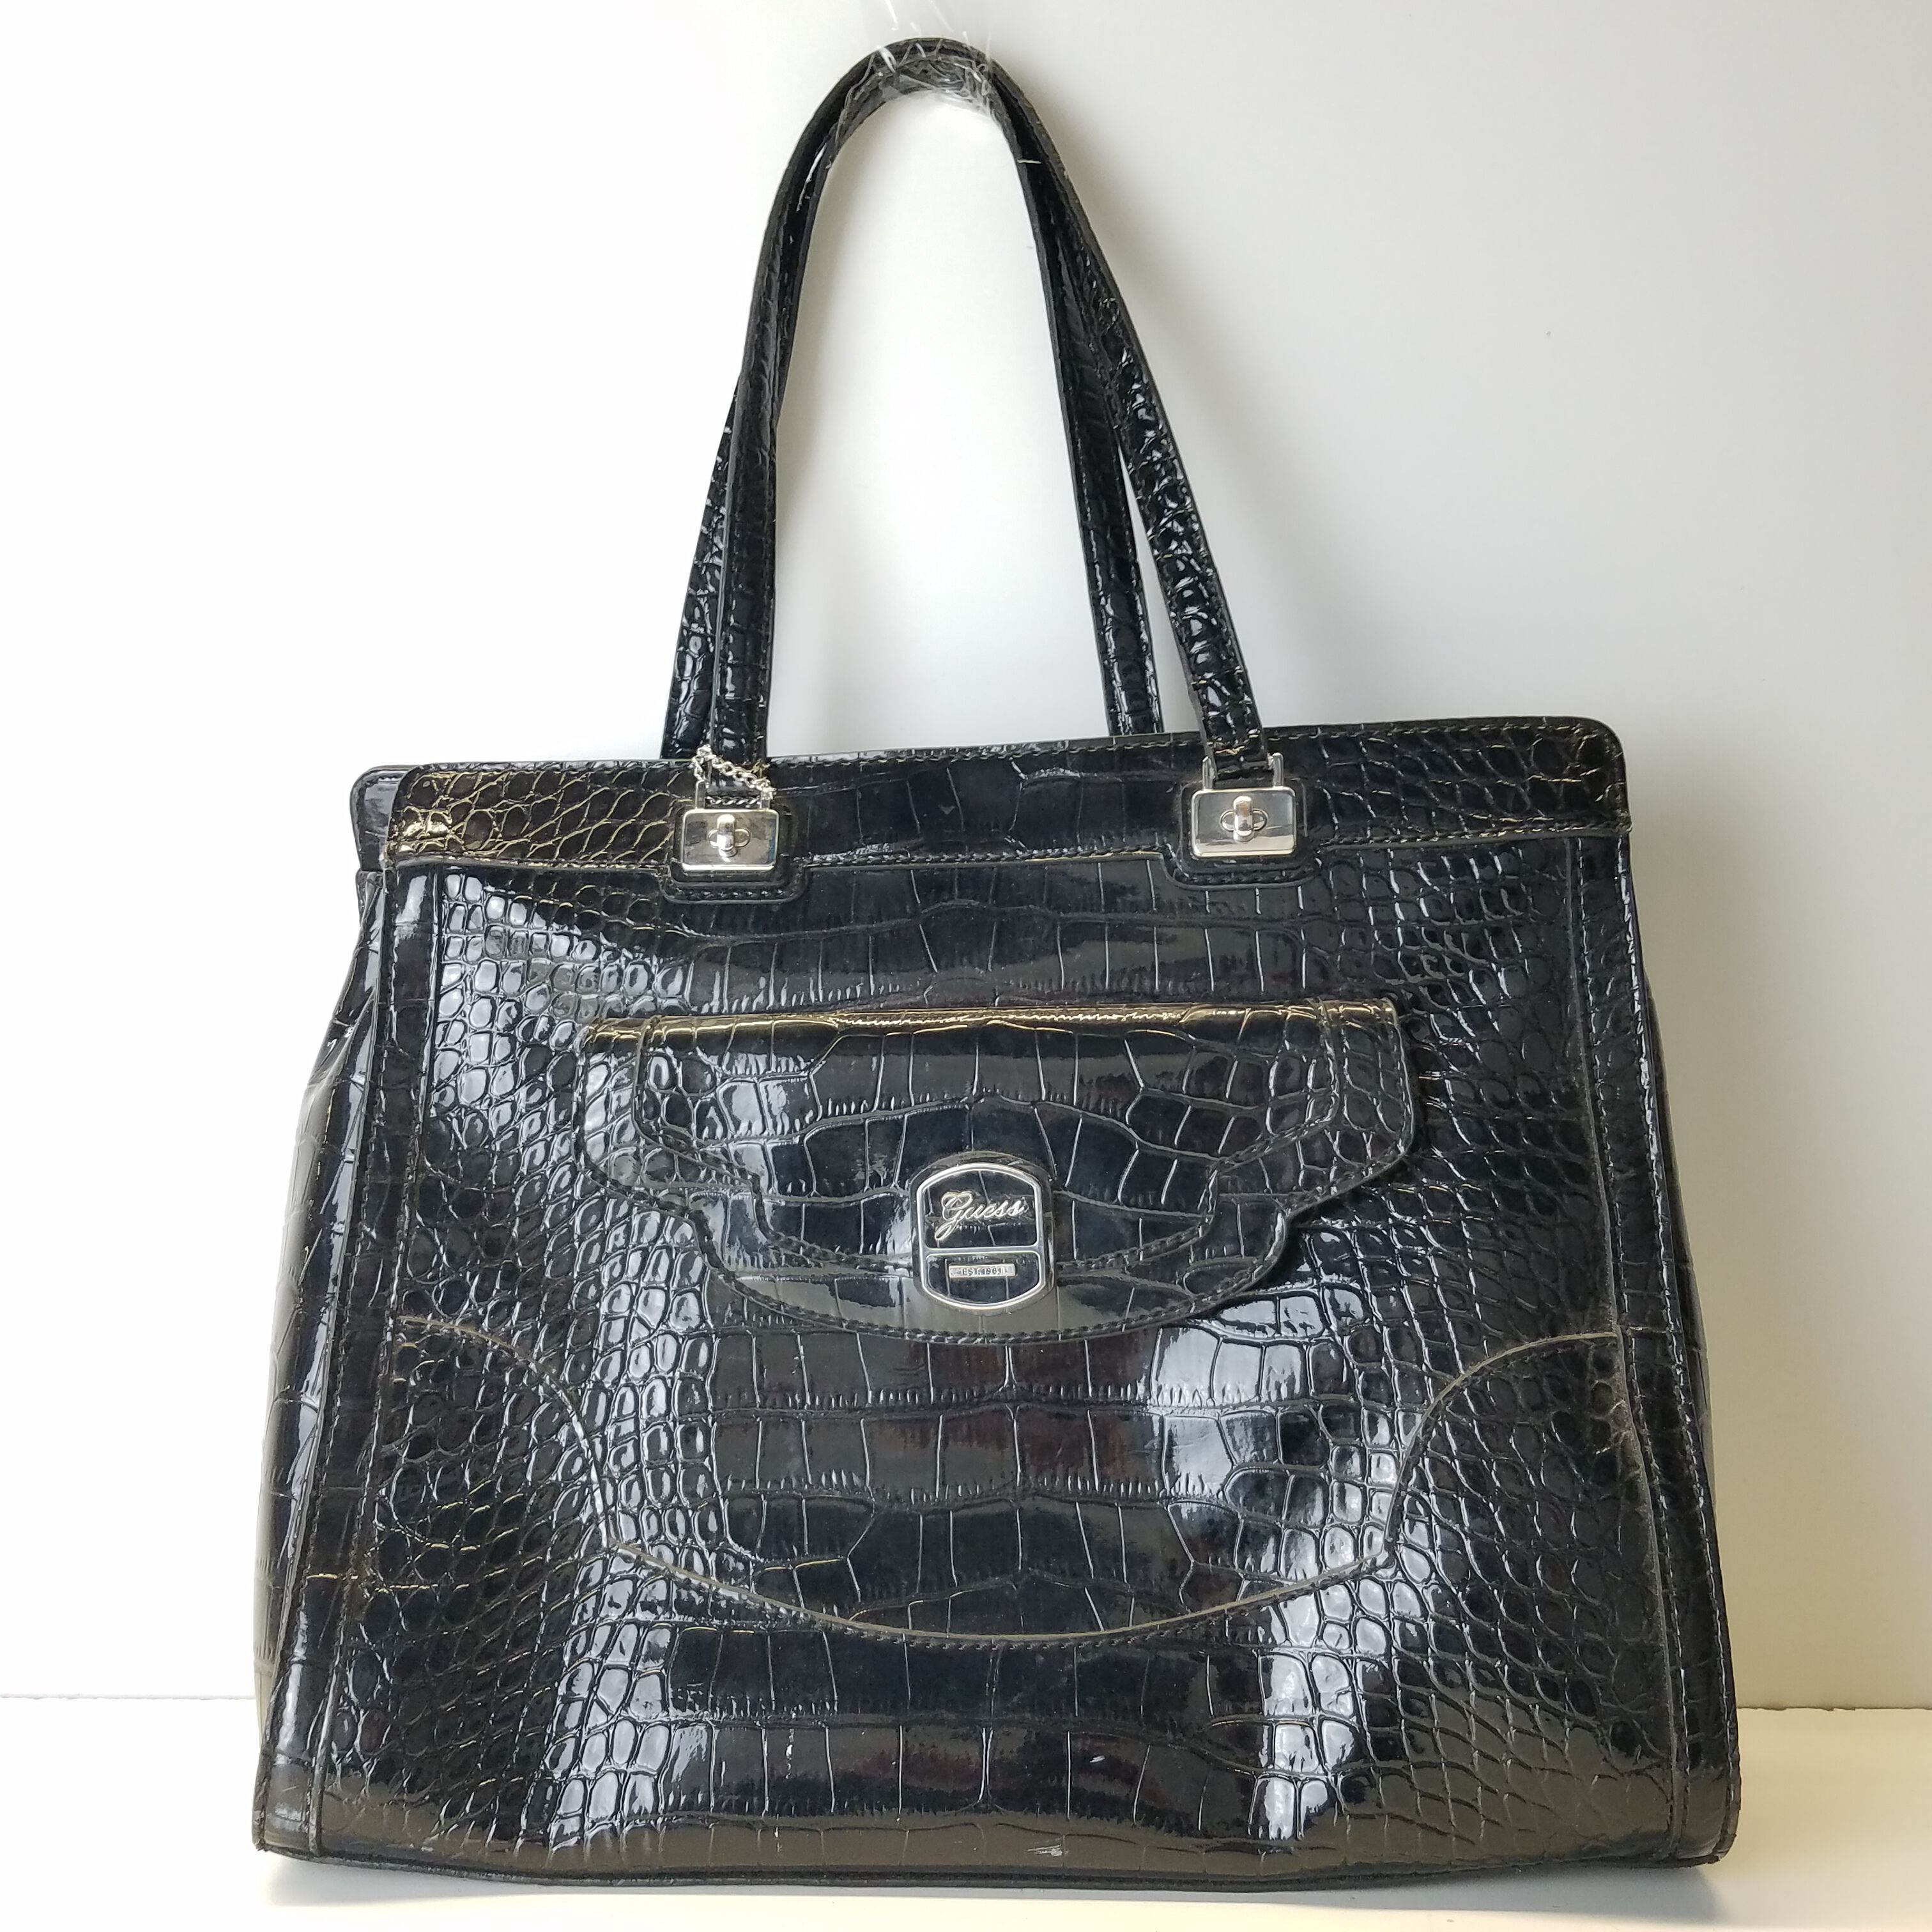 Guess Black Glossy Patent Quilted Signature Satchel Handbag Purse, New! -  AbuMaizar Dental Roots Clinic